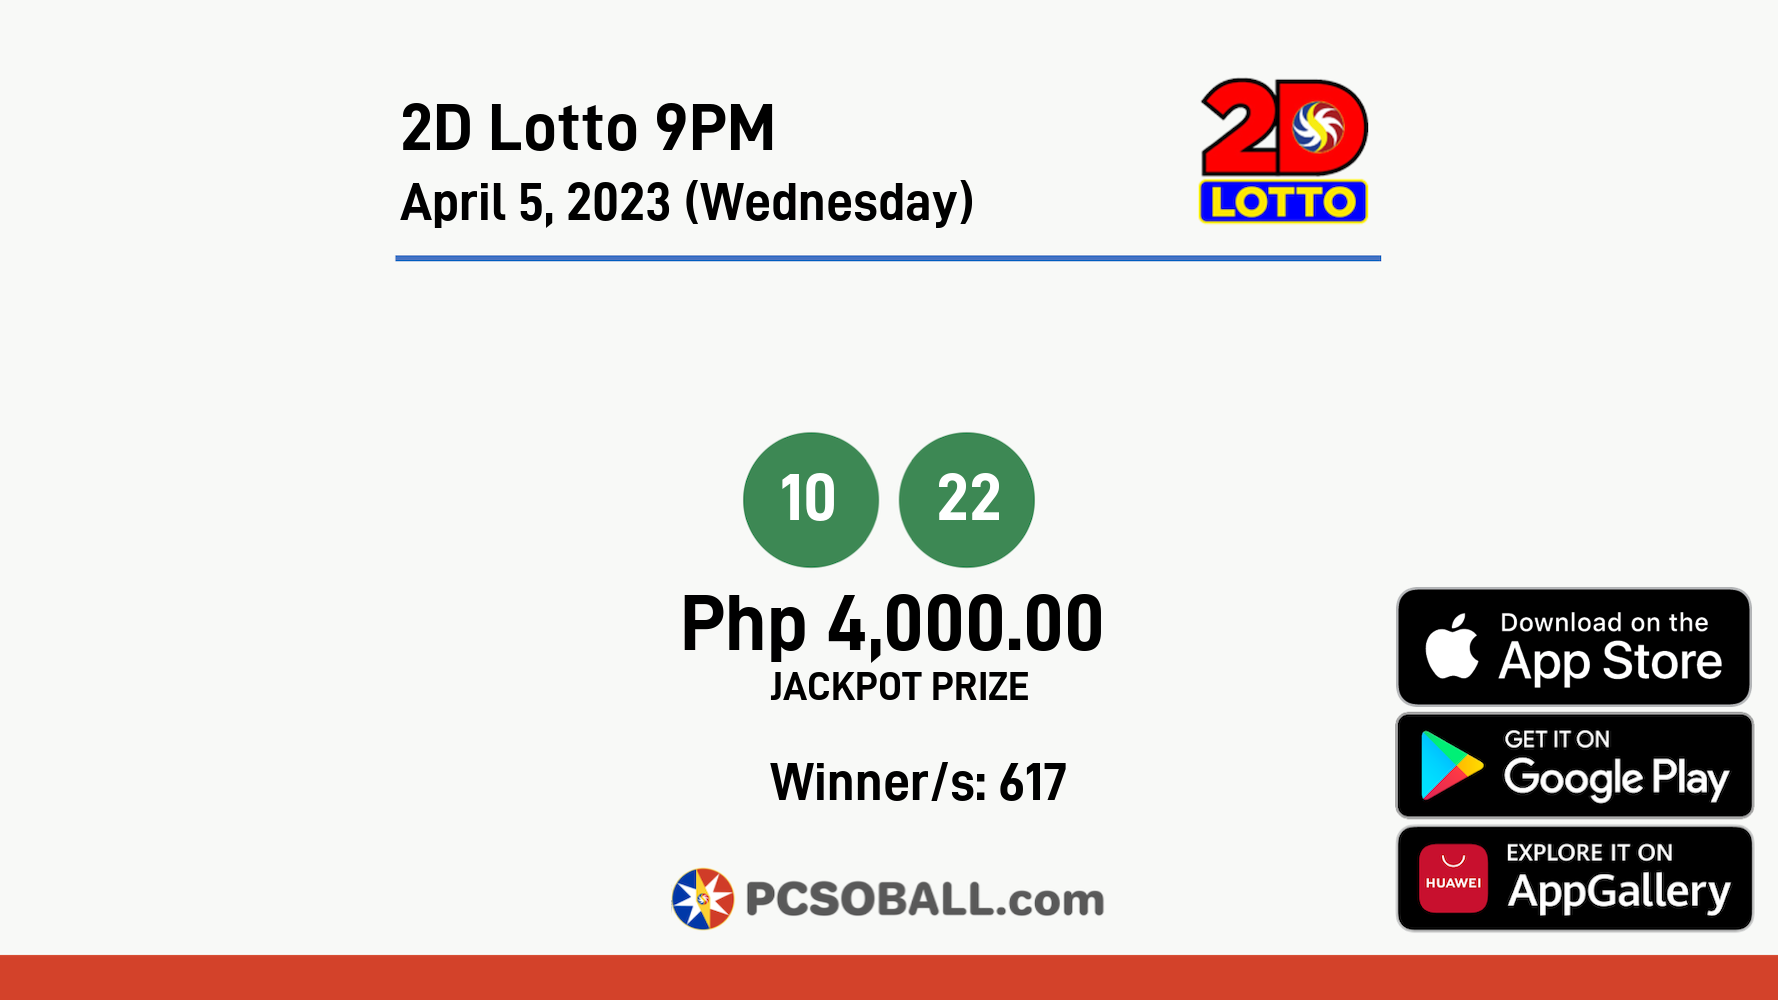 2D Lotto 9PM April 5, 2023 (Wednesday) Result